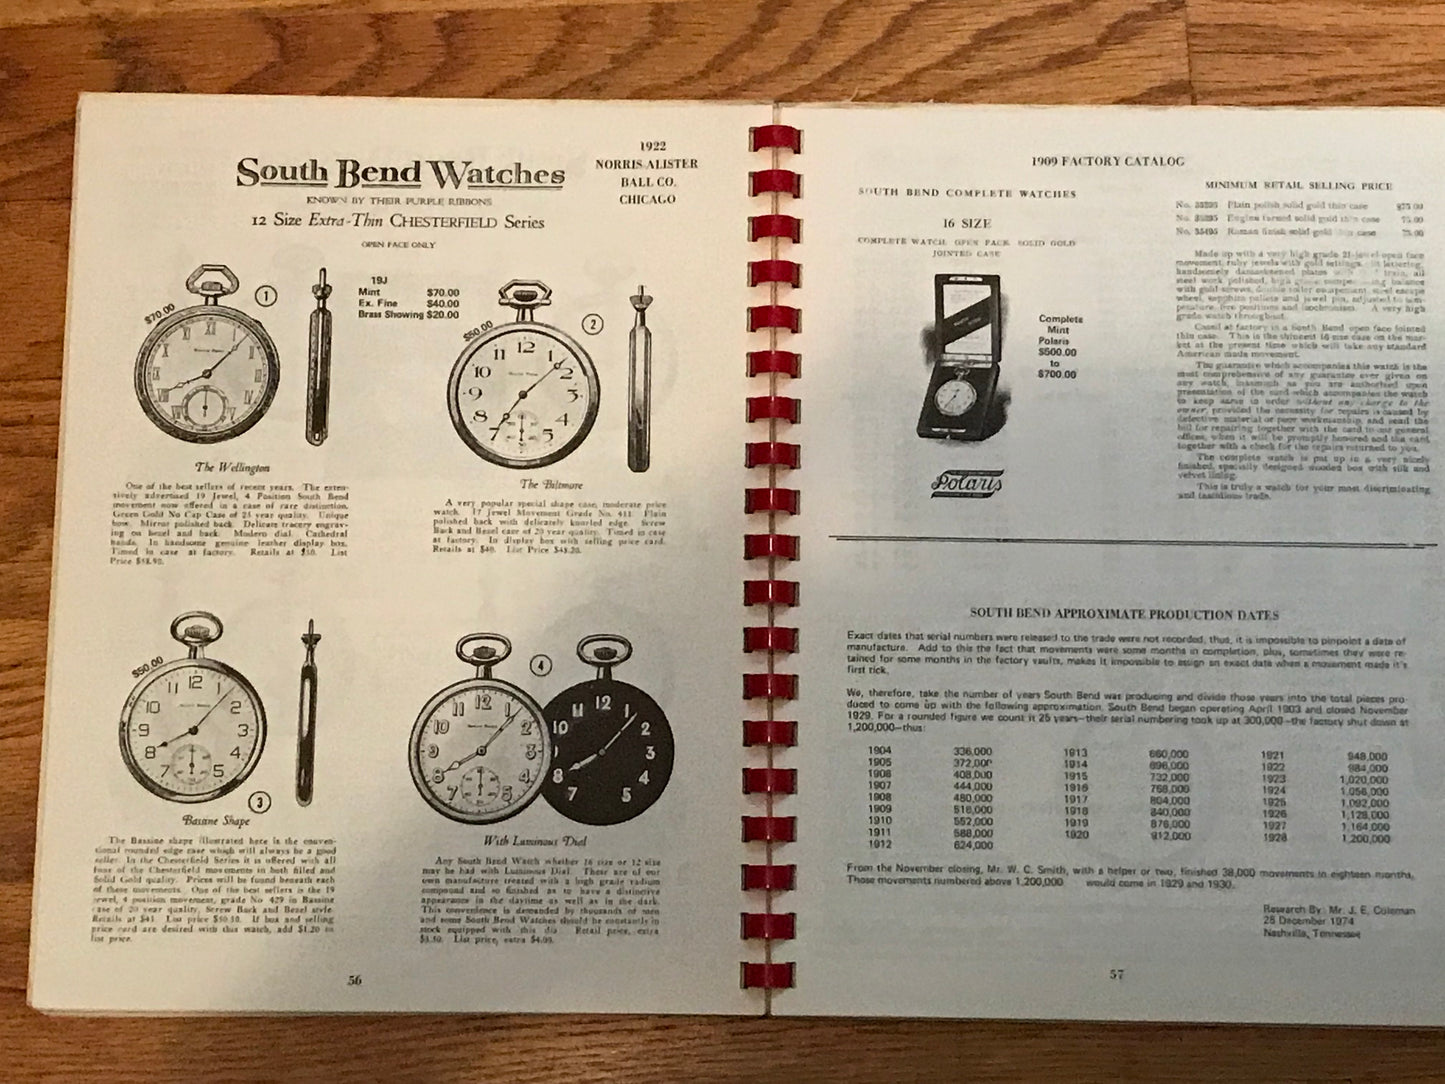 American Pocket Watch 1977 Price Guide by Roy Ehrhardt